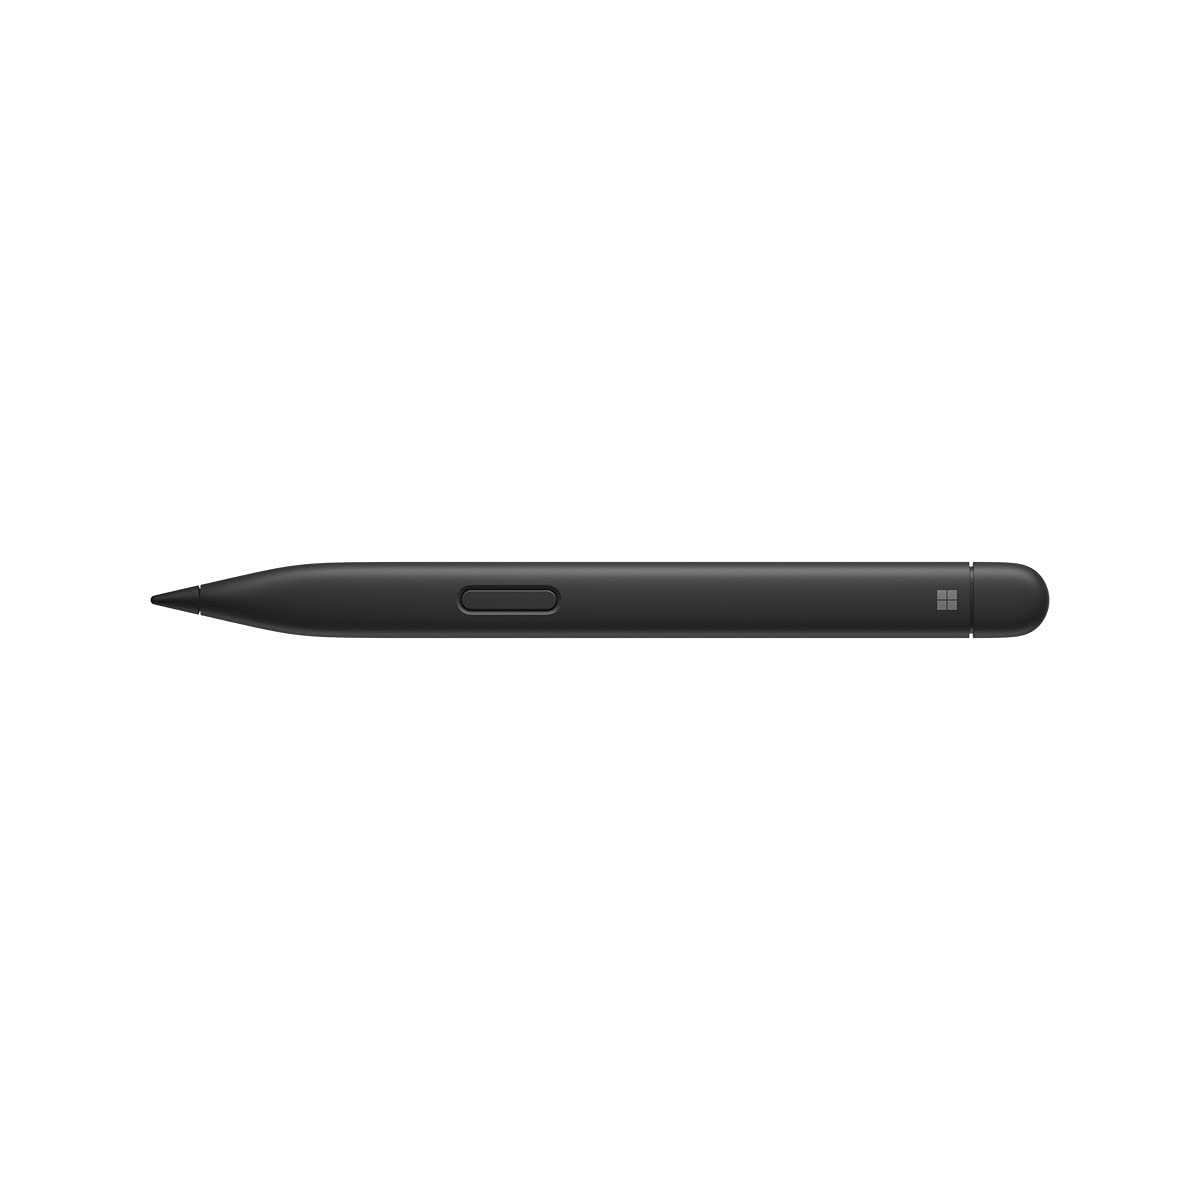 Microsoft Surface Slim Pen 2 with Charger (Matte Black) 2-in-1 Bundle